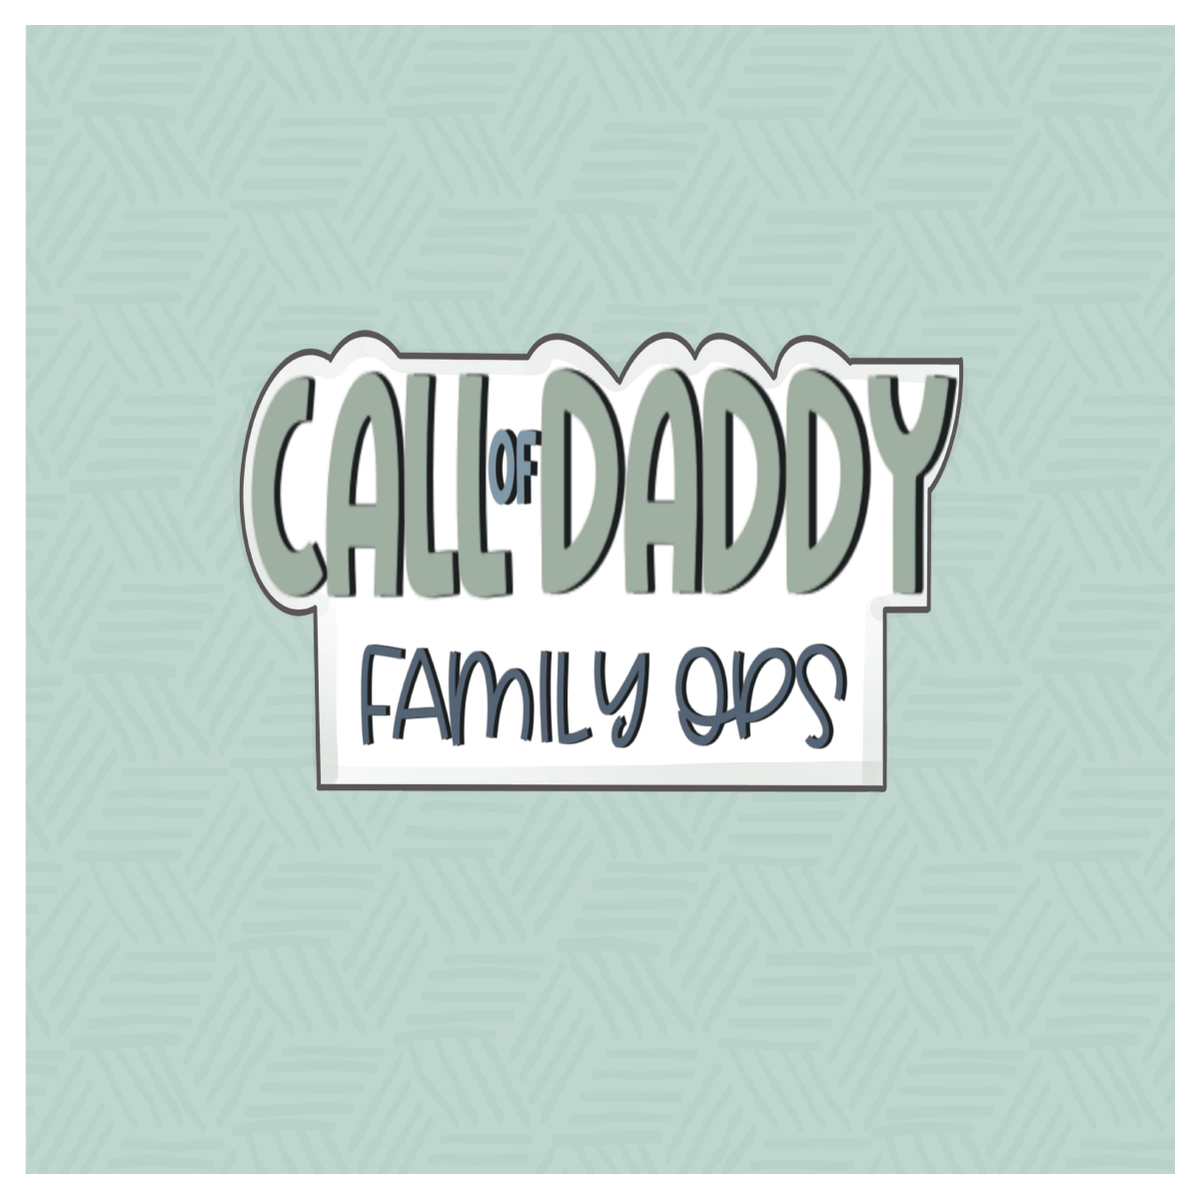 Call of Daddy Hand Lettered Cookie Cutter